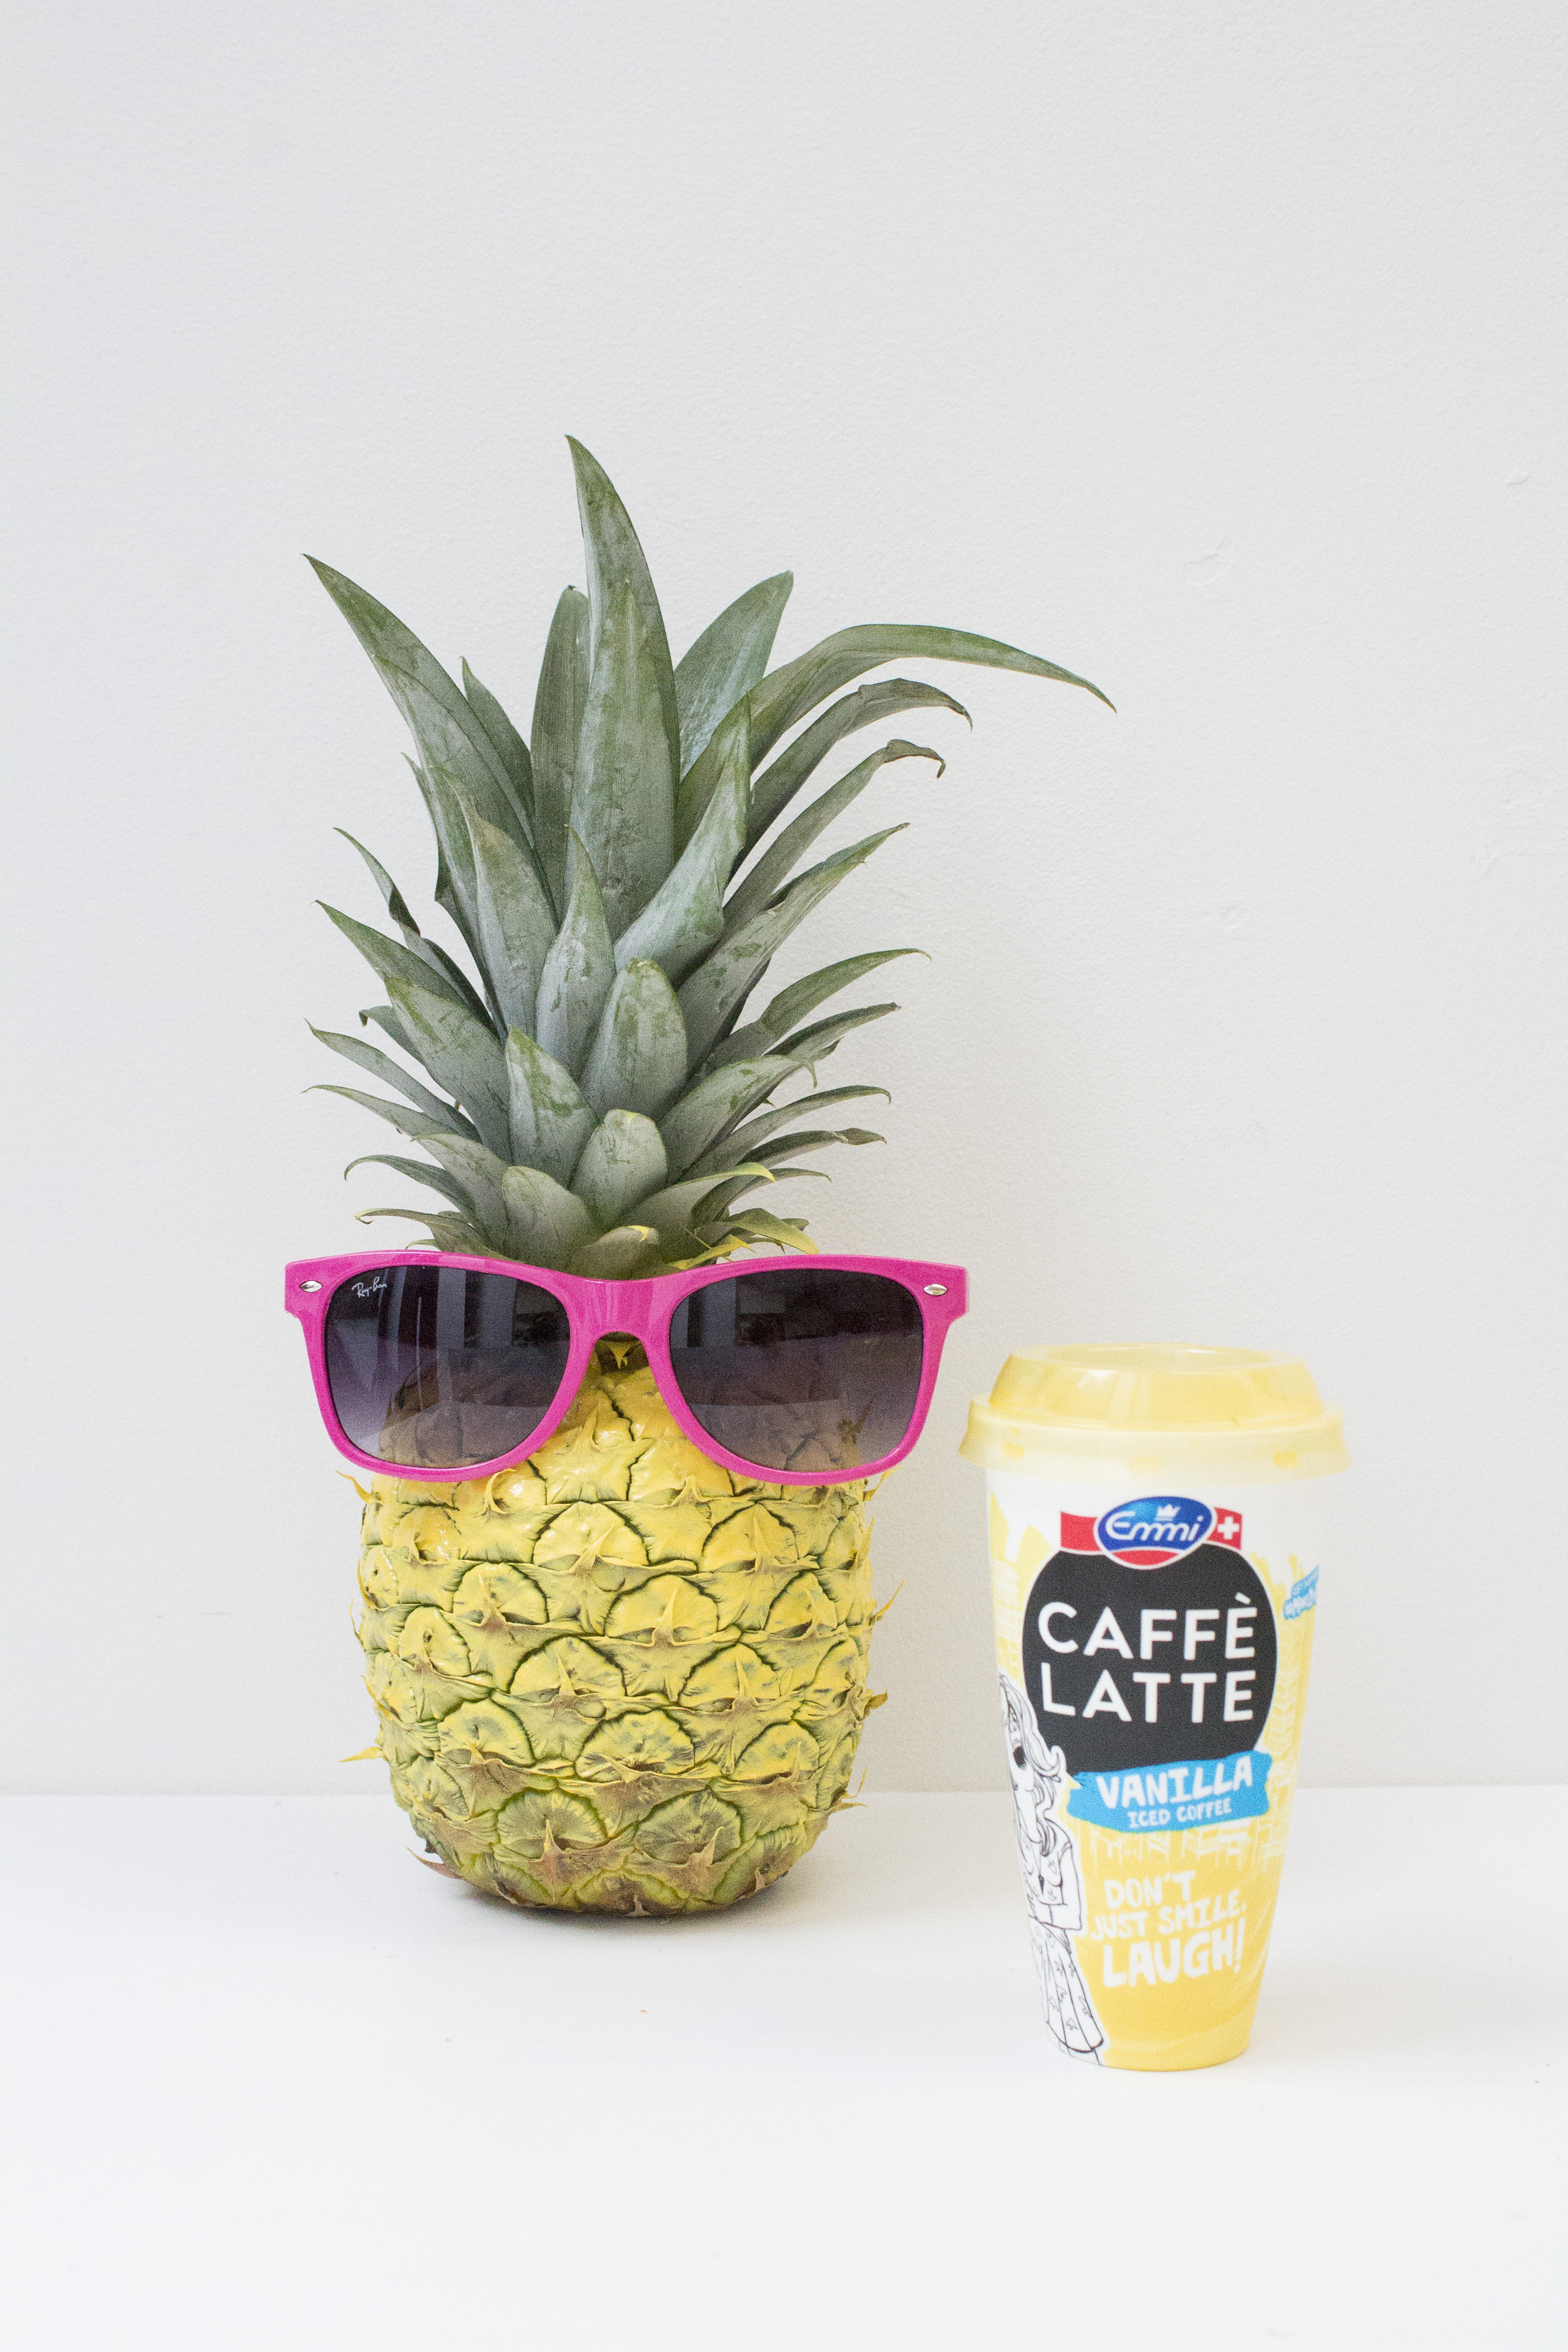 pineapple-with-sunglasses-Little-Big-Bell